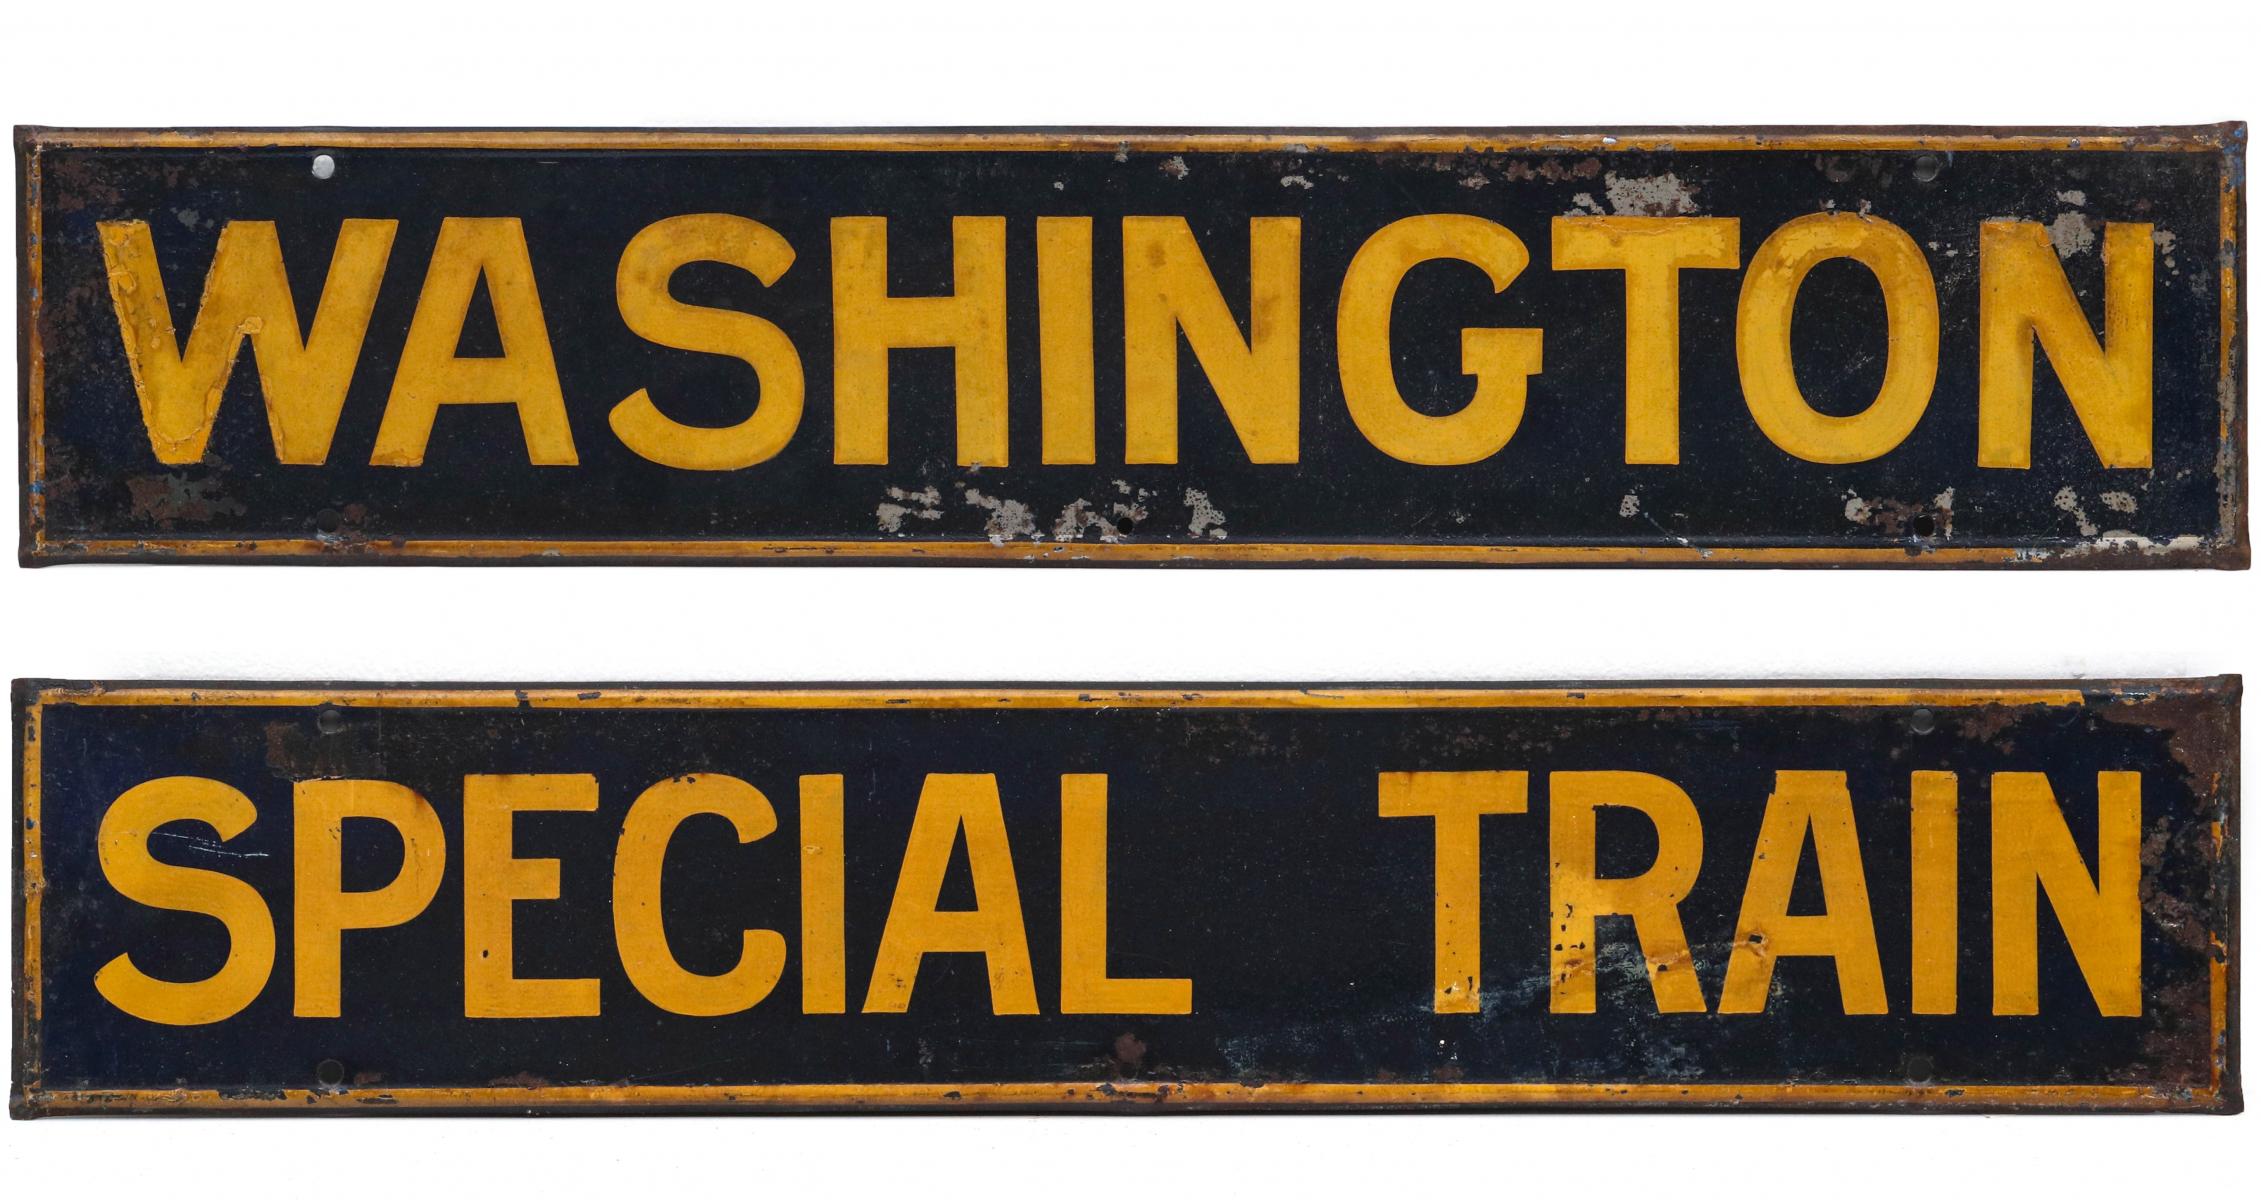 'WASHINGTON SPECIAL TRAIN' PAINTED STEEL SIGNS